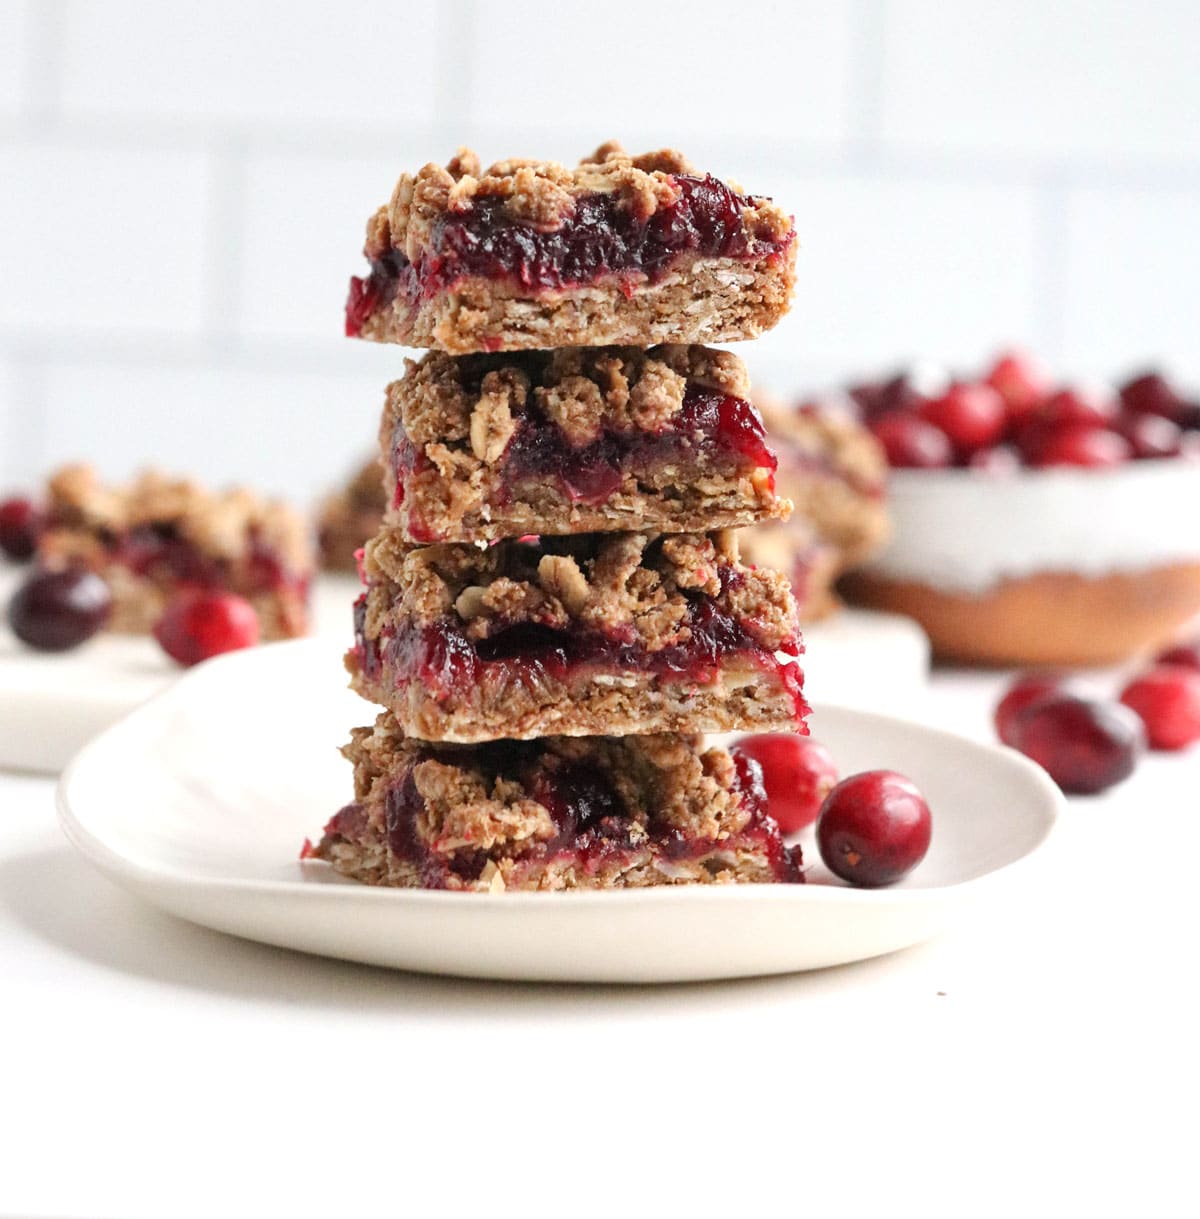 cranberry bars stacked on white plate